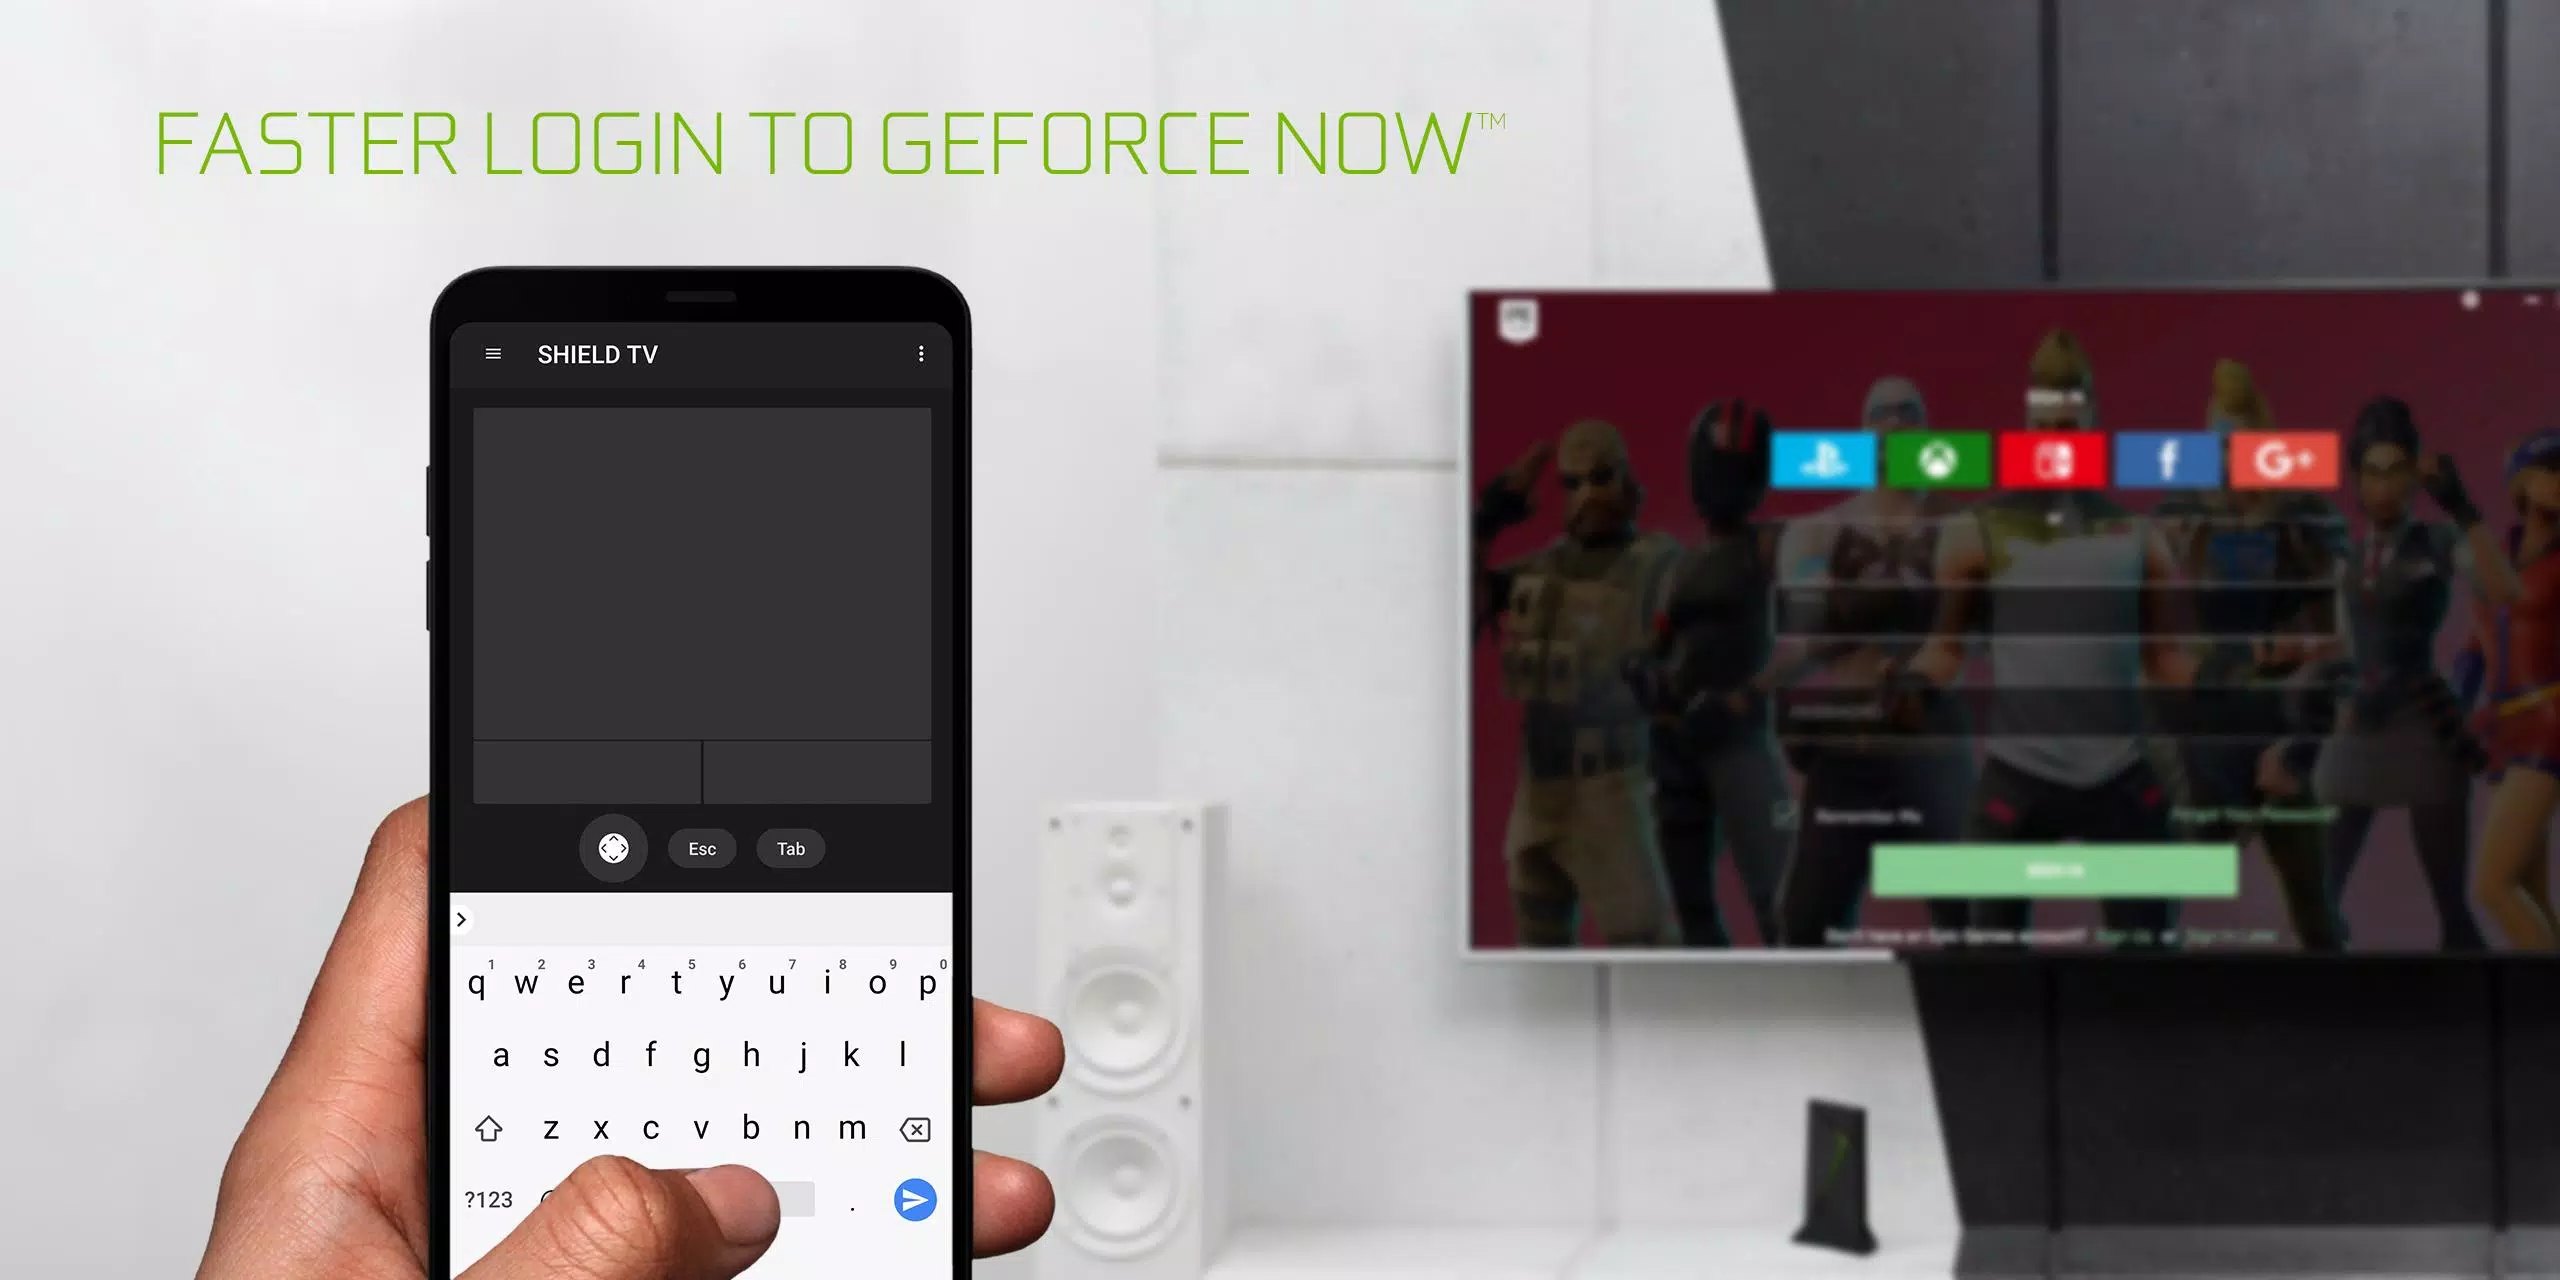 NVIDIA GeForce NOW for Android - Download the APK from Uptodown